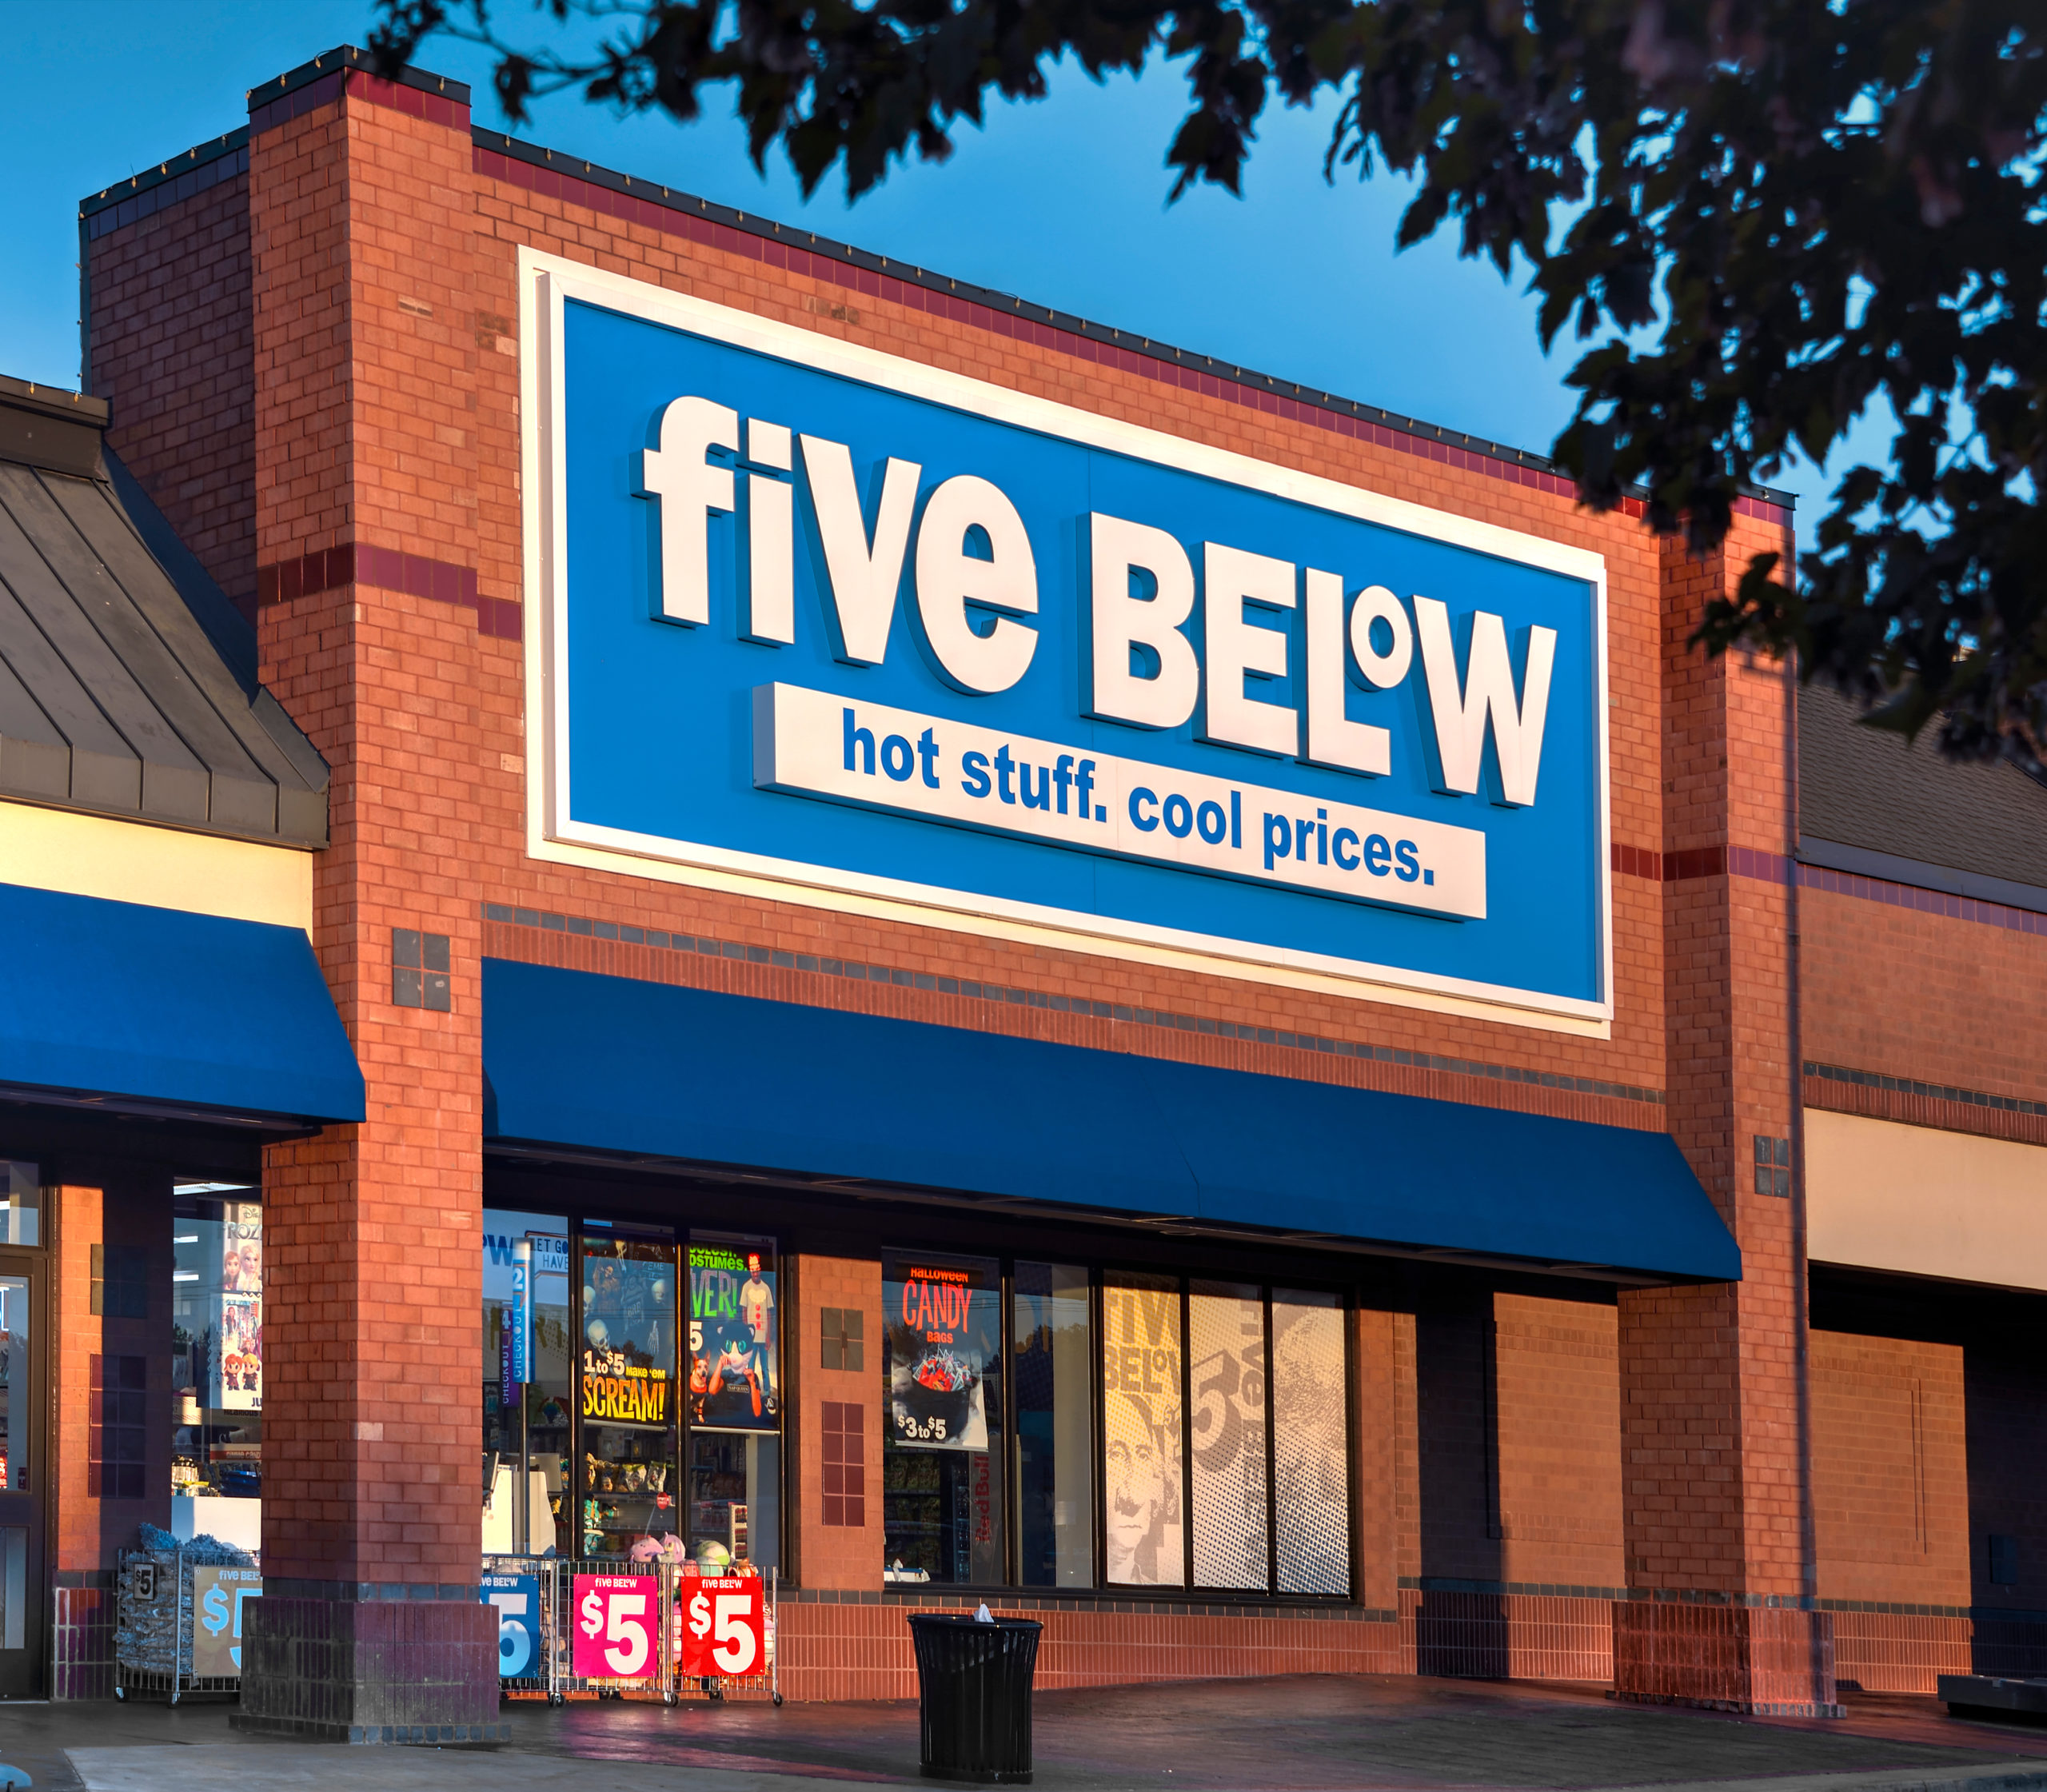 More Five Below Stores Headed to Premium Outlets Malls